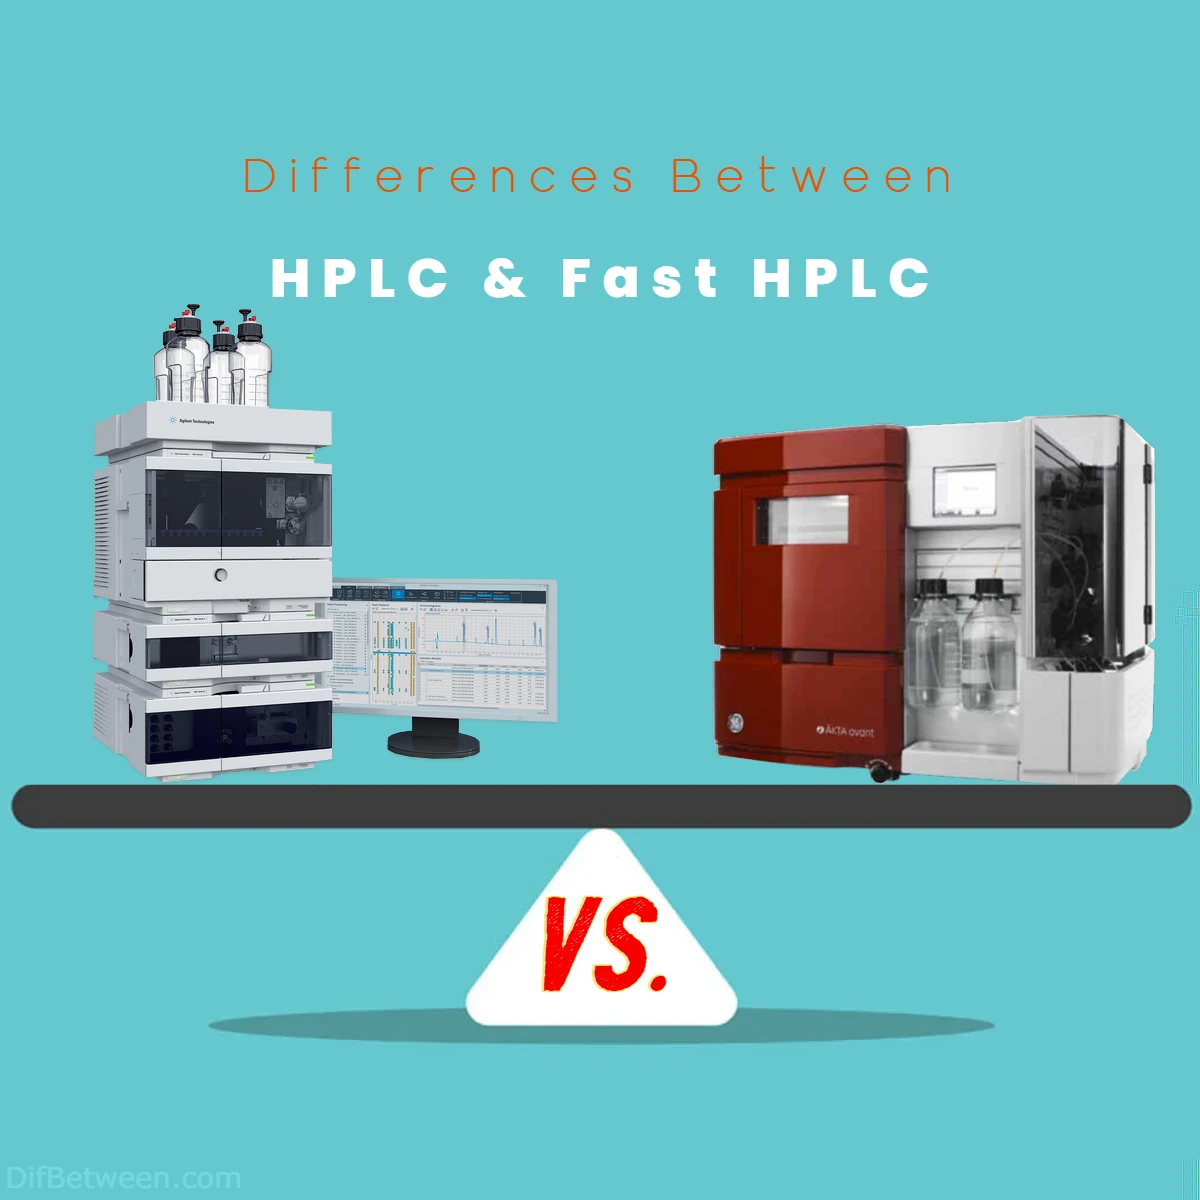 Differences Between HPLC vs Fast HPLC